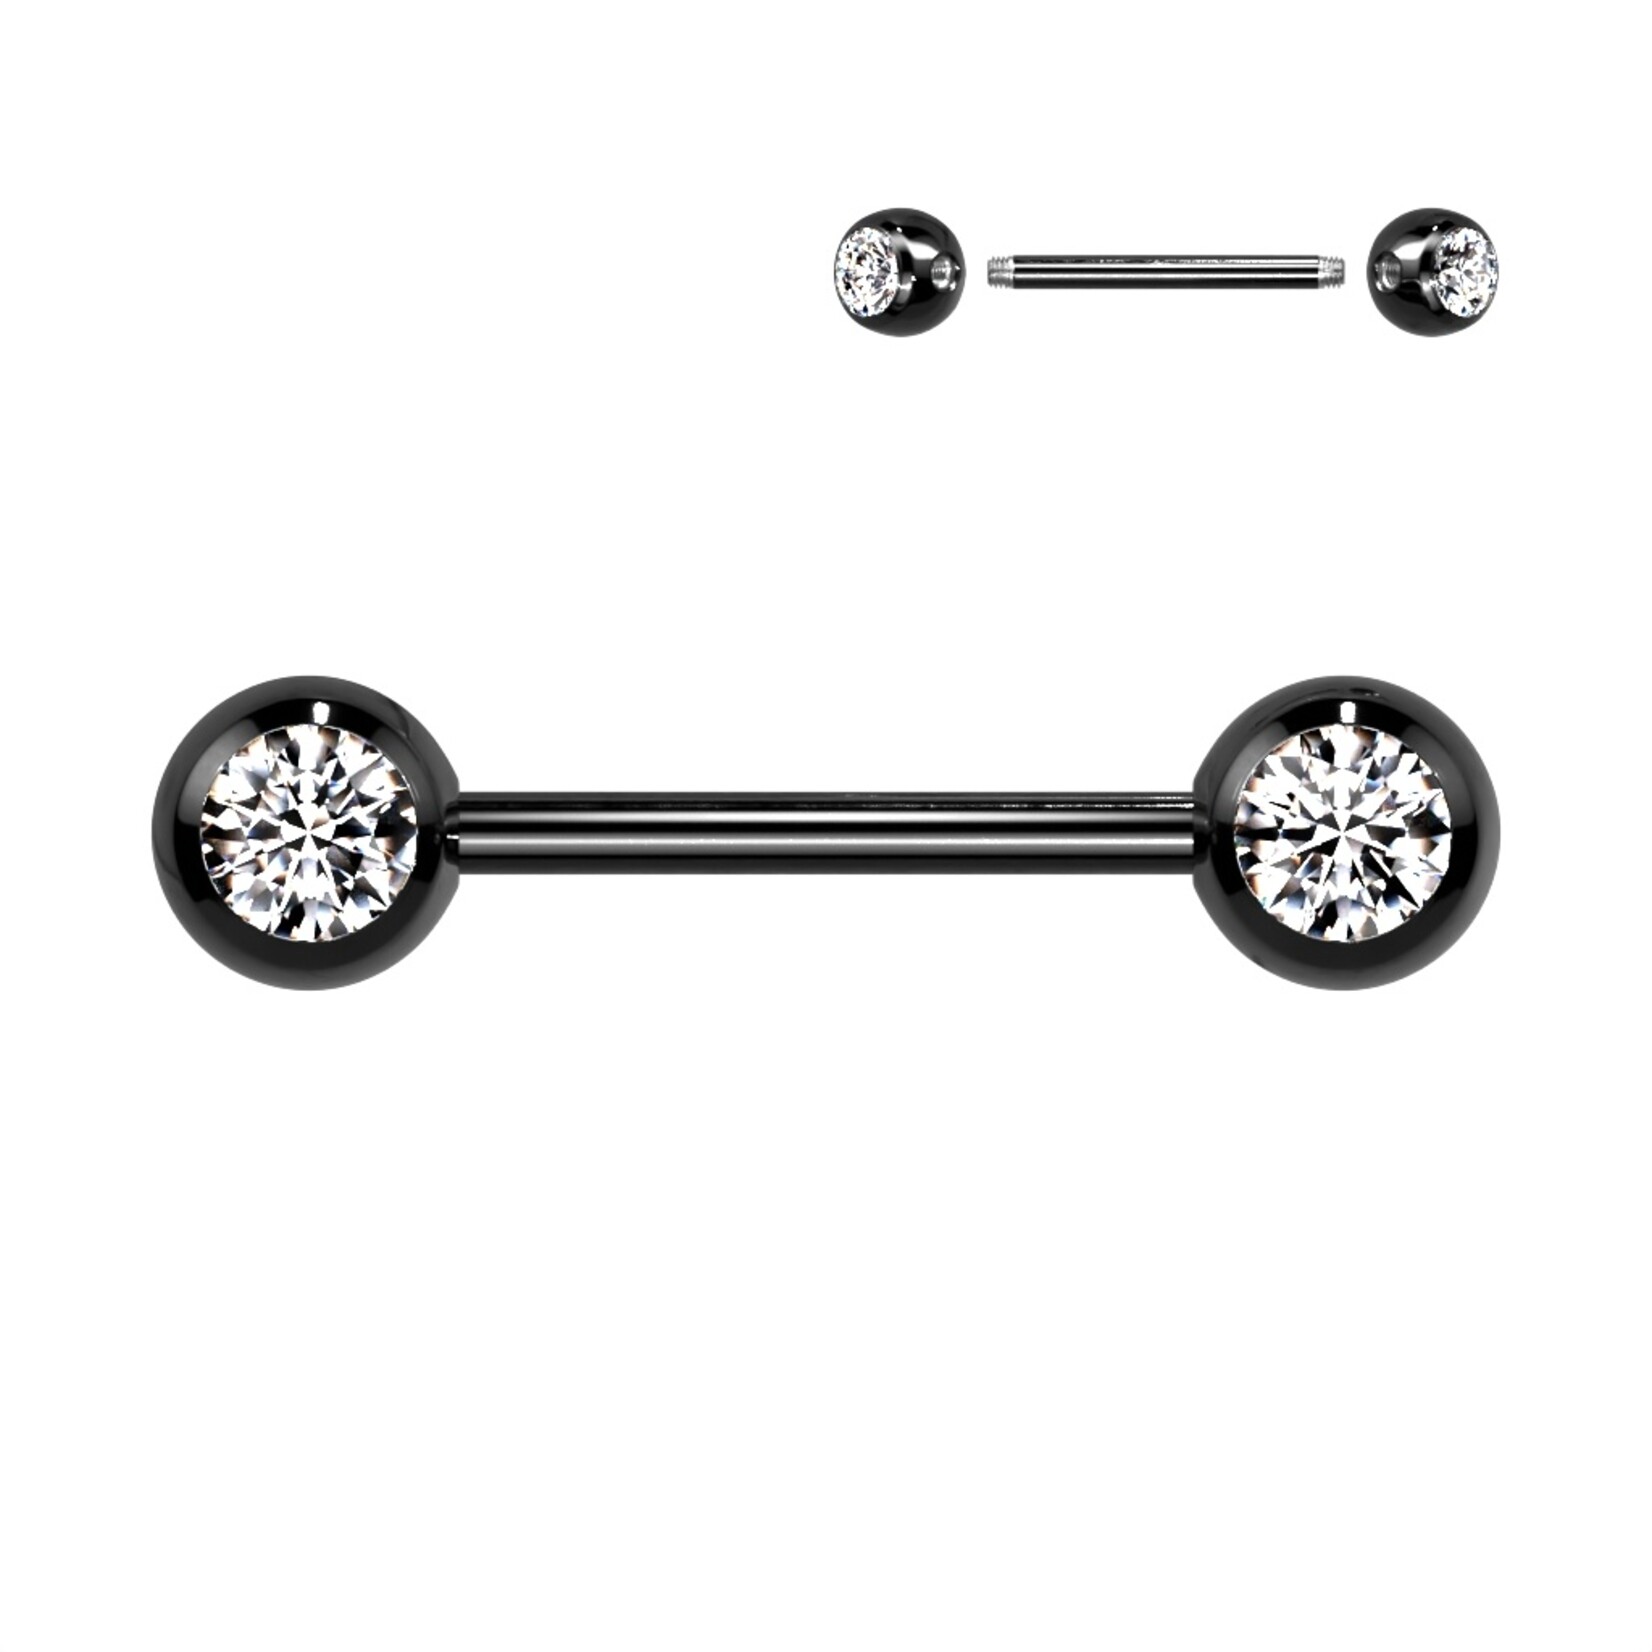 Hollywood Body Jewelry Barbell Double Gems